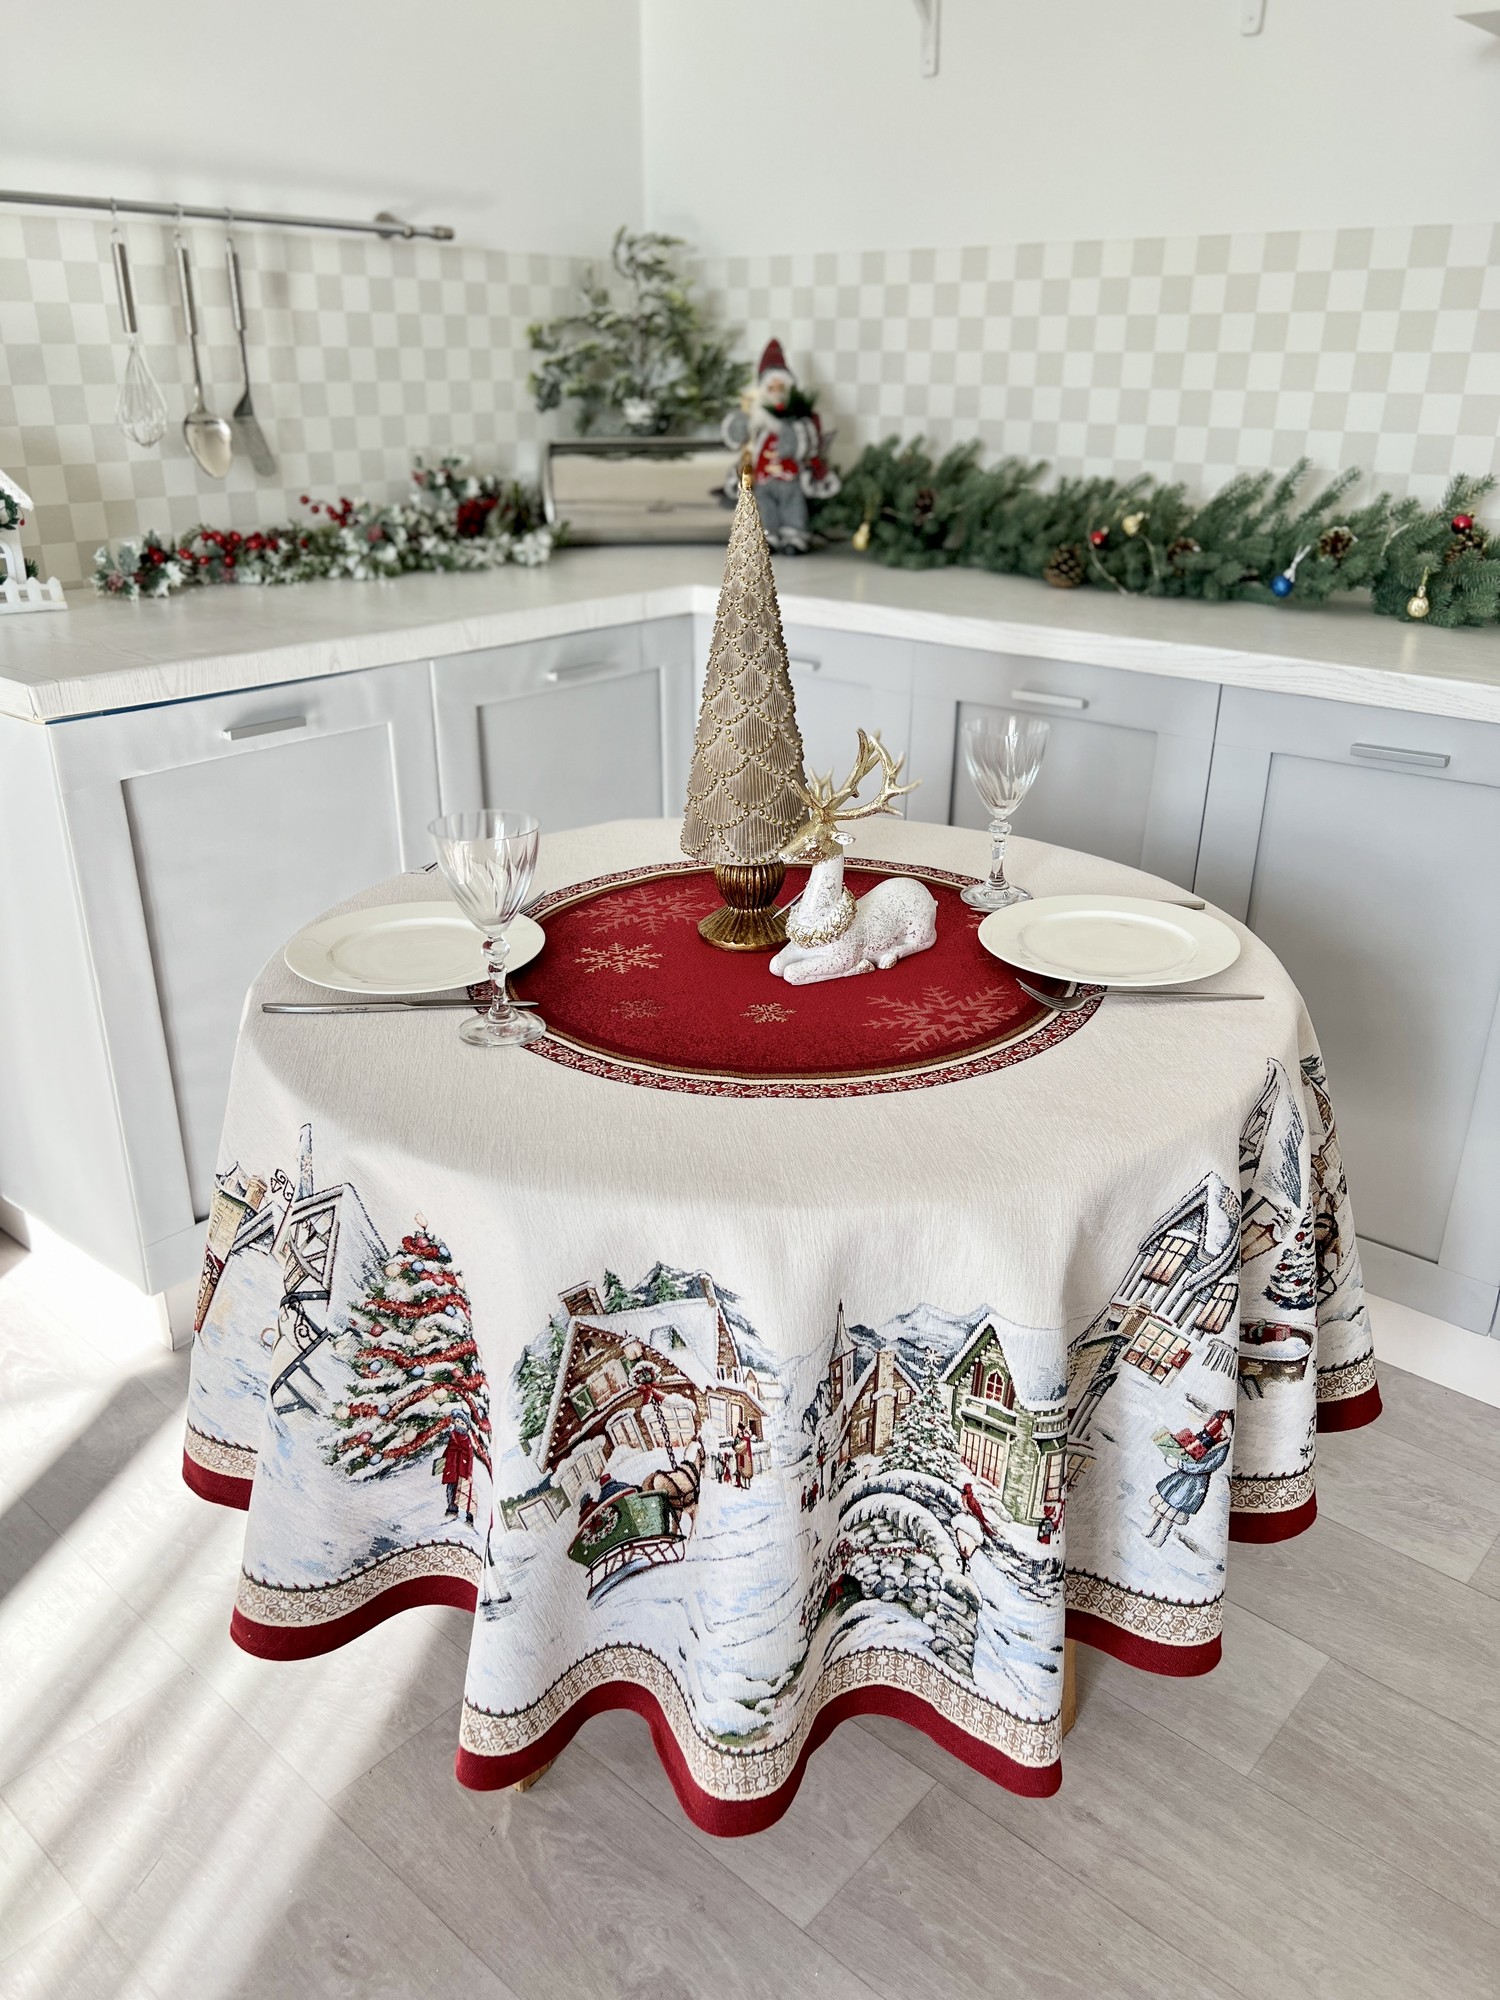 Christmas tapestry tablecloth for round table ø180 cm (71 in), round festive tablecloth